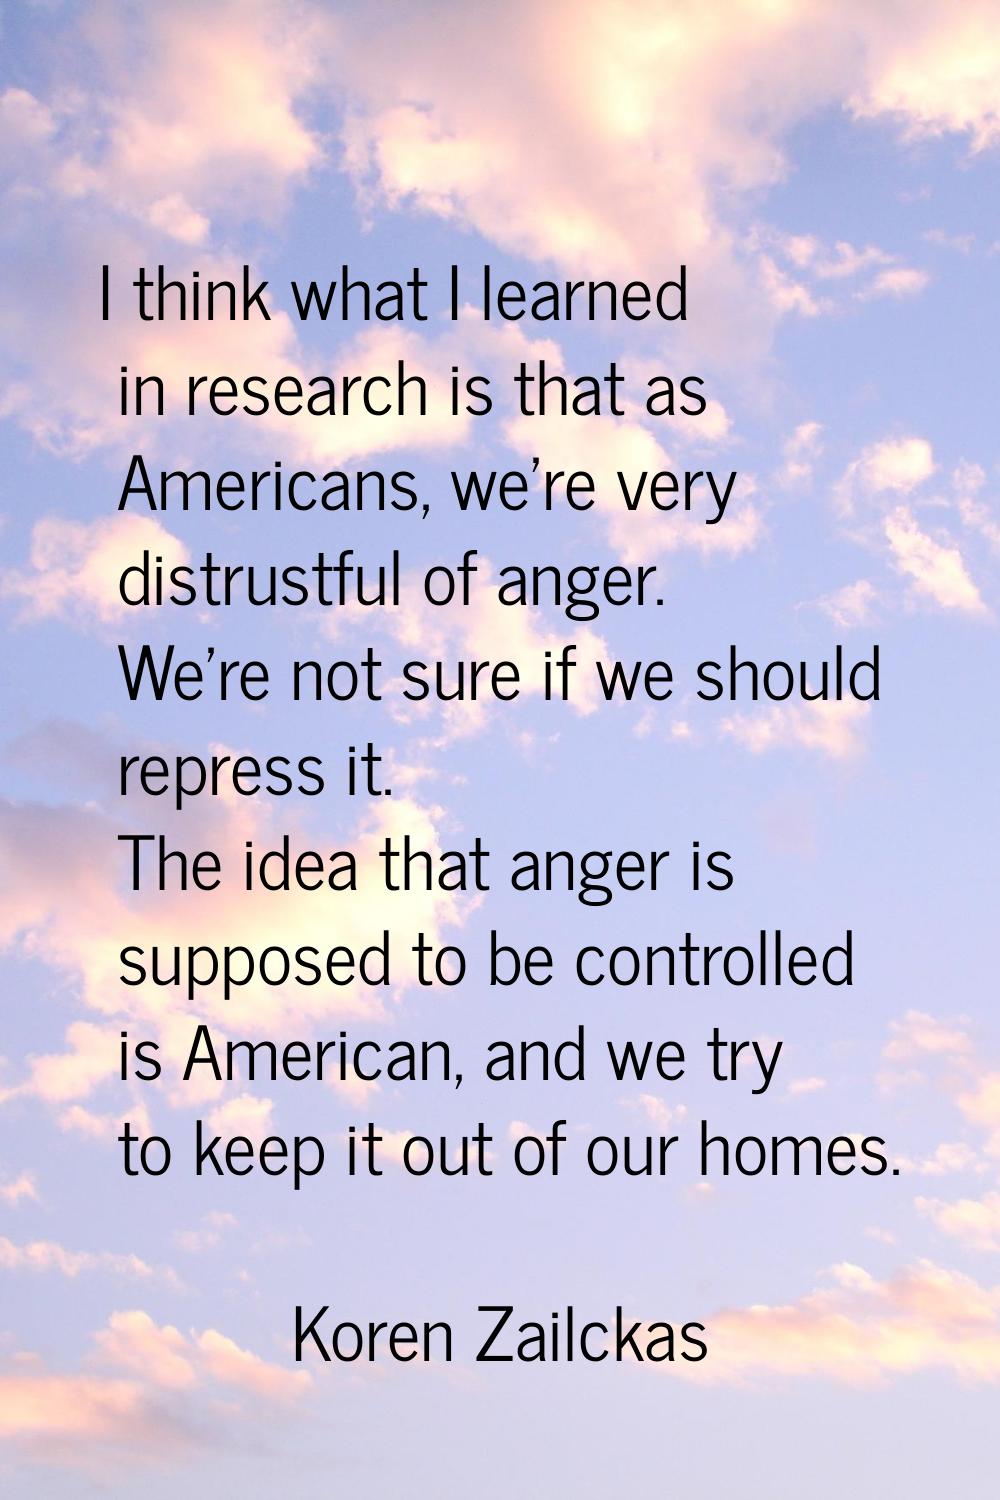 I think what I learned in research is that as Americans, we're very distrustful of anger. We're not